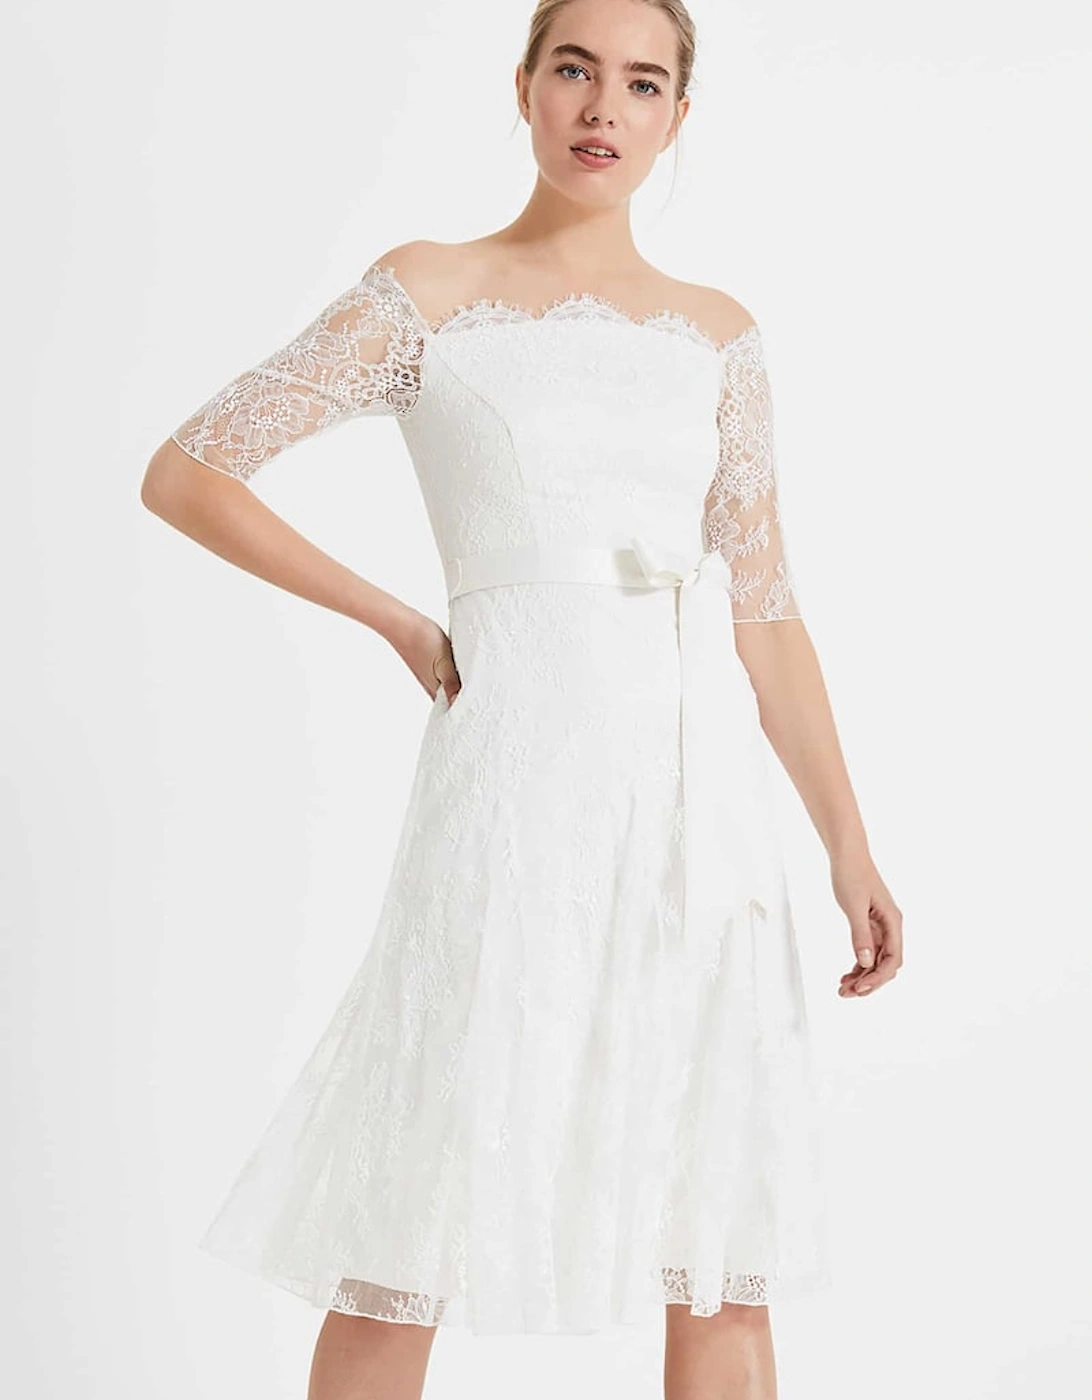 Evette Lace Wedding Dress, 7 of 6